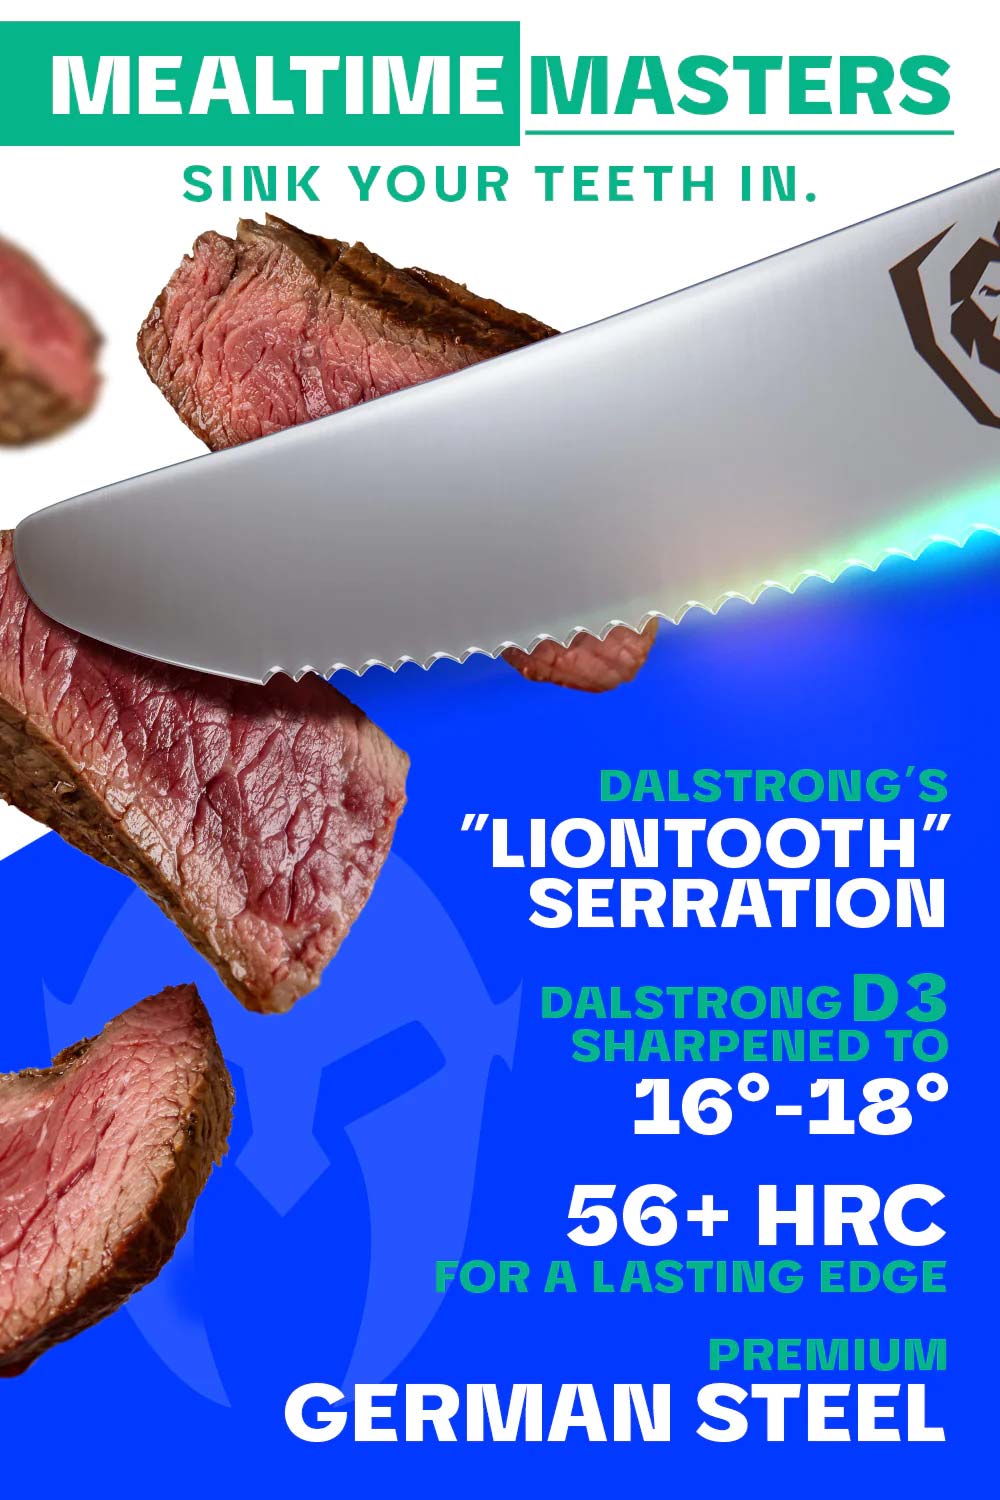 Dalstrong Steak Knife Set - 4 Piece - 4.5 inch Serrated Blade - Frost Fire Series - High Chromium 10Cr15CoMoV Steel Kitchen Knife - Frosted